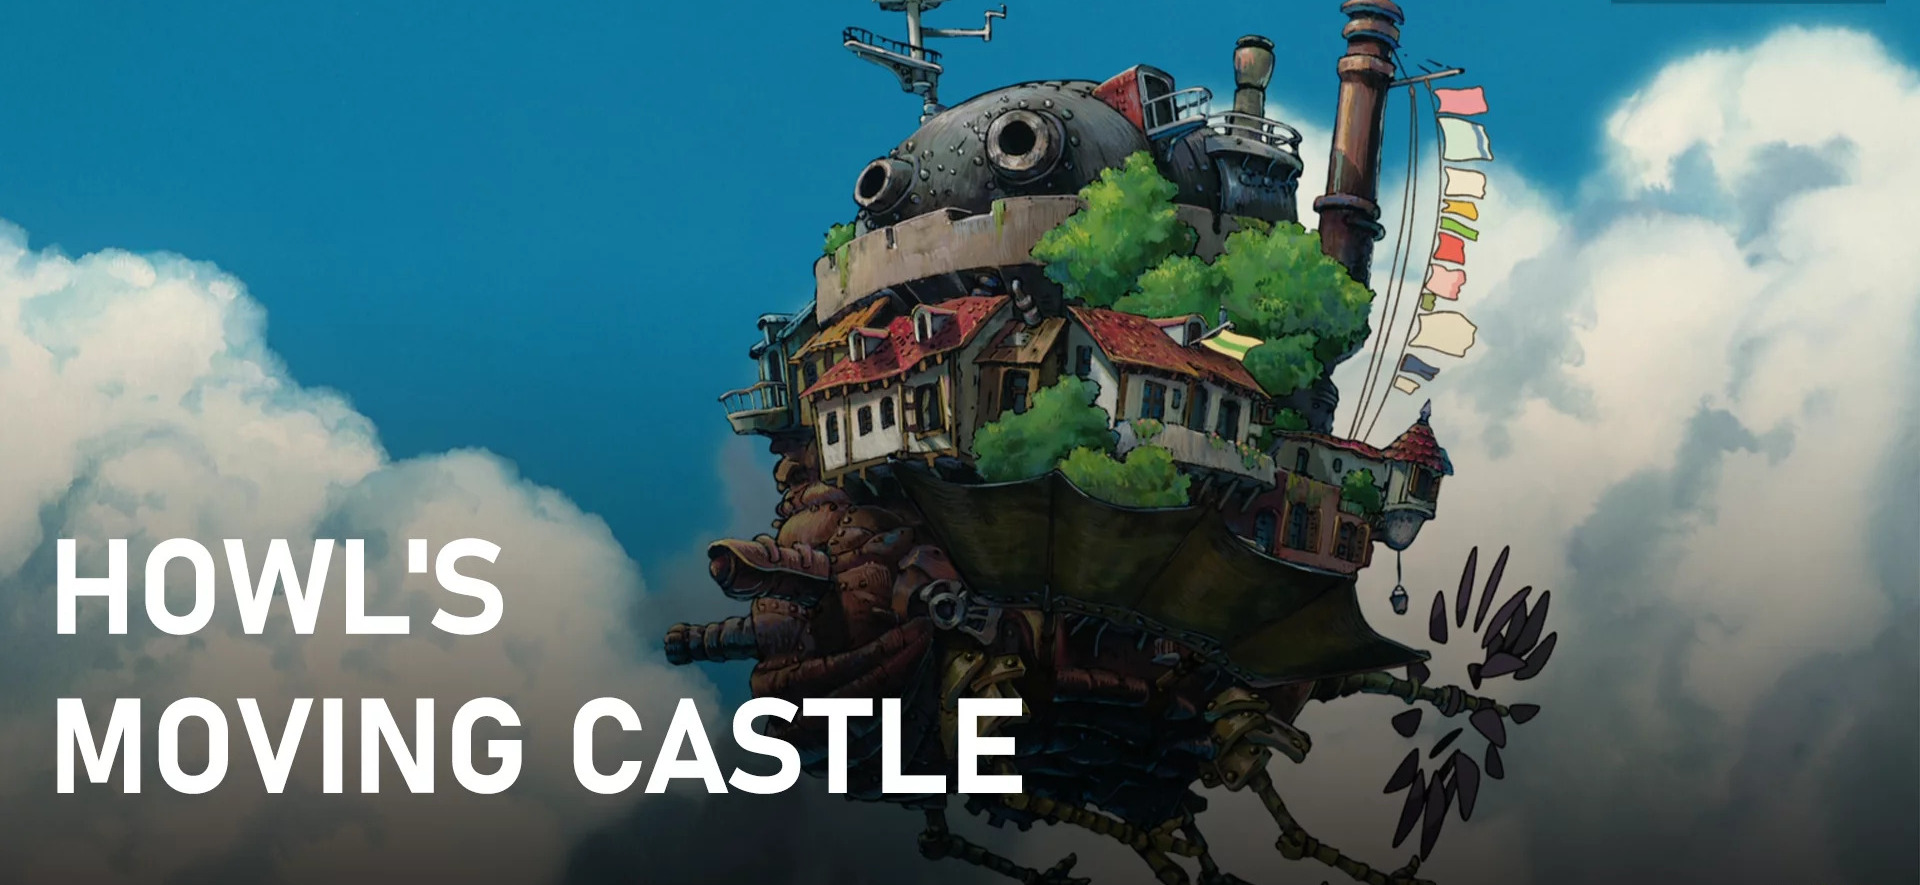 48 Facts about the movie Howl's Moving Castle 